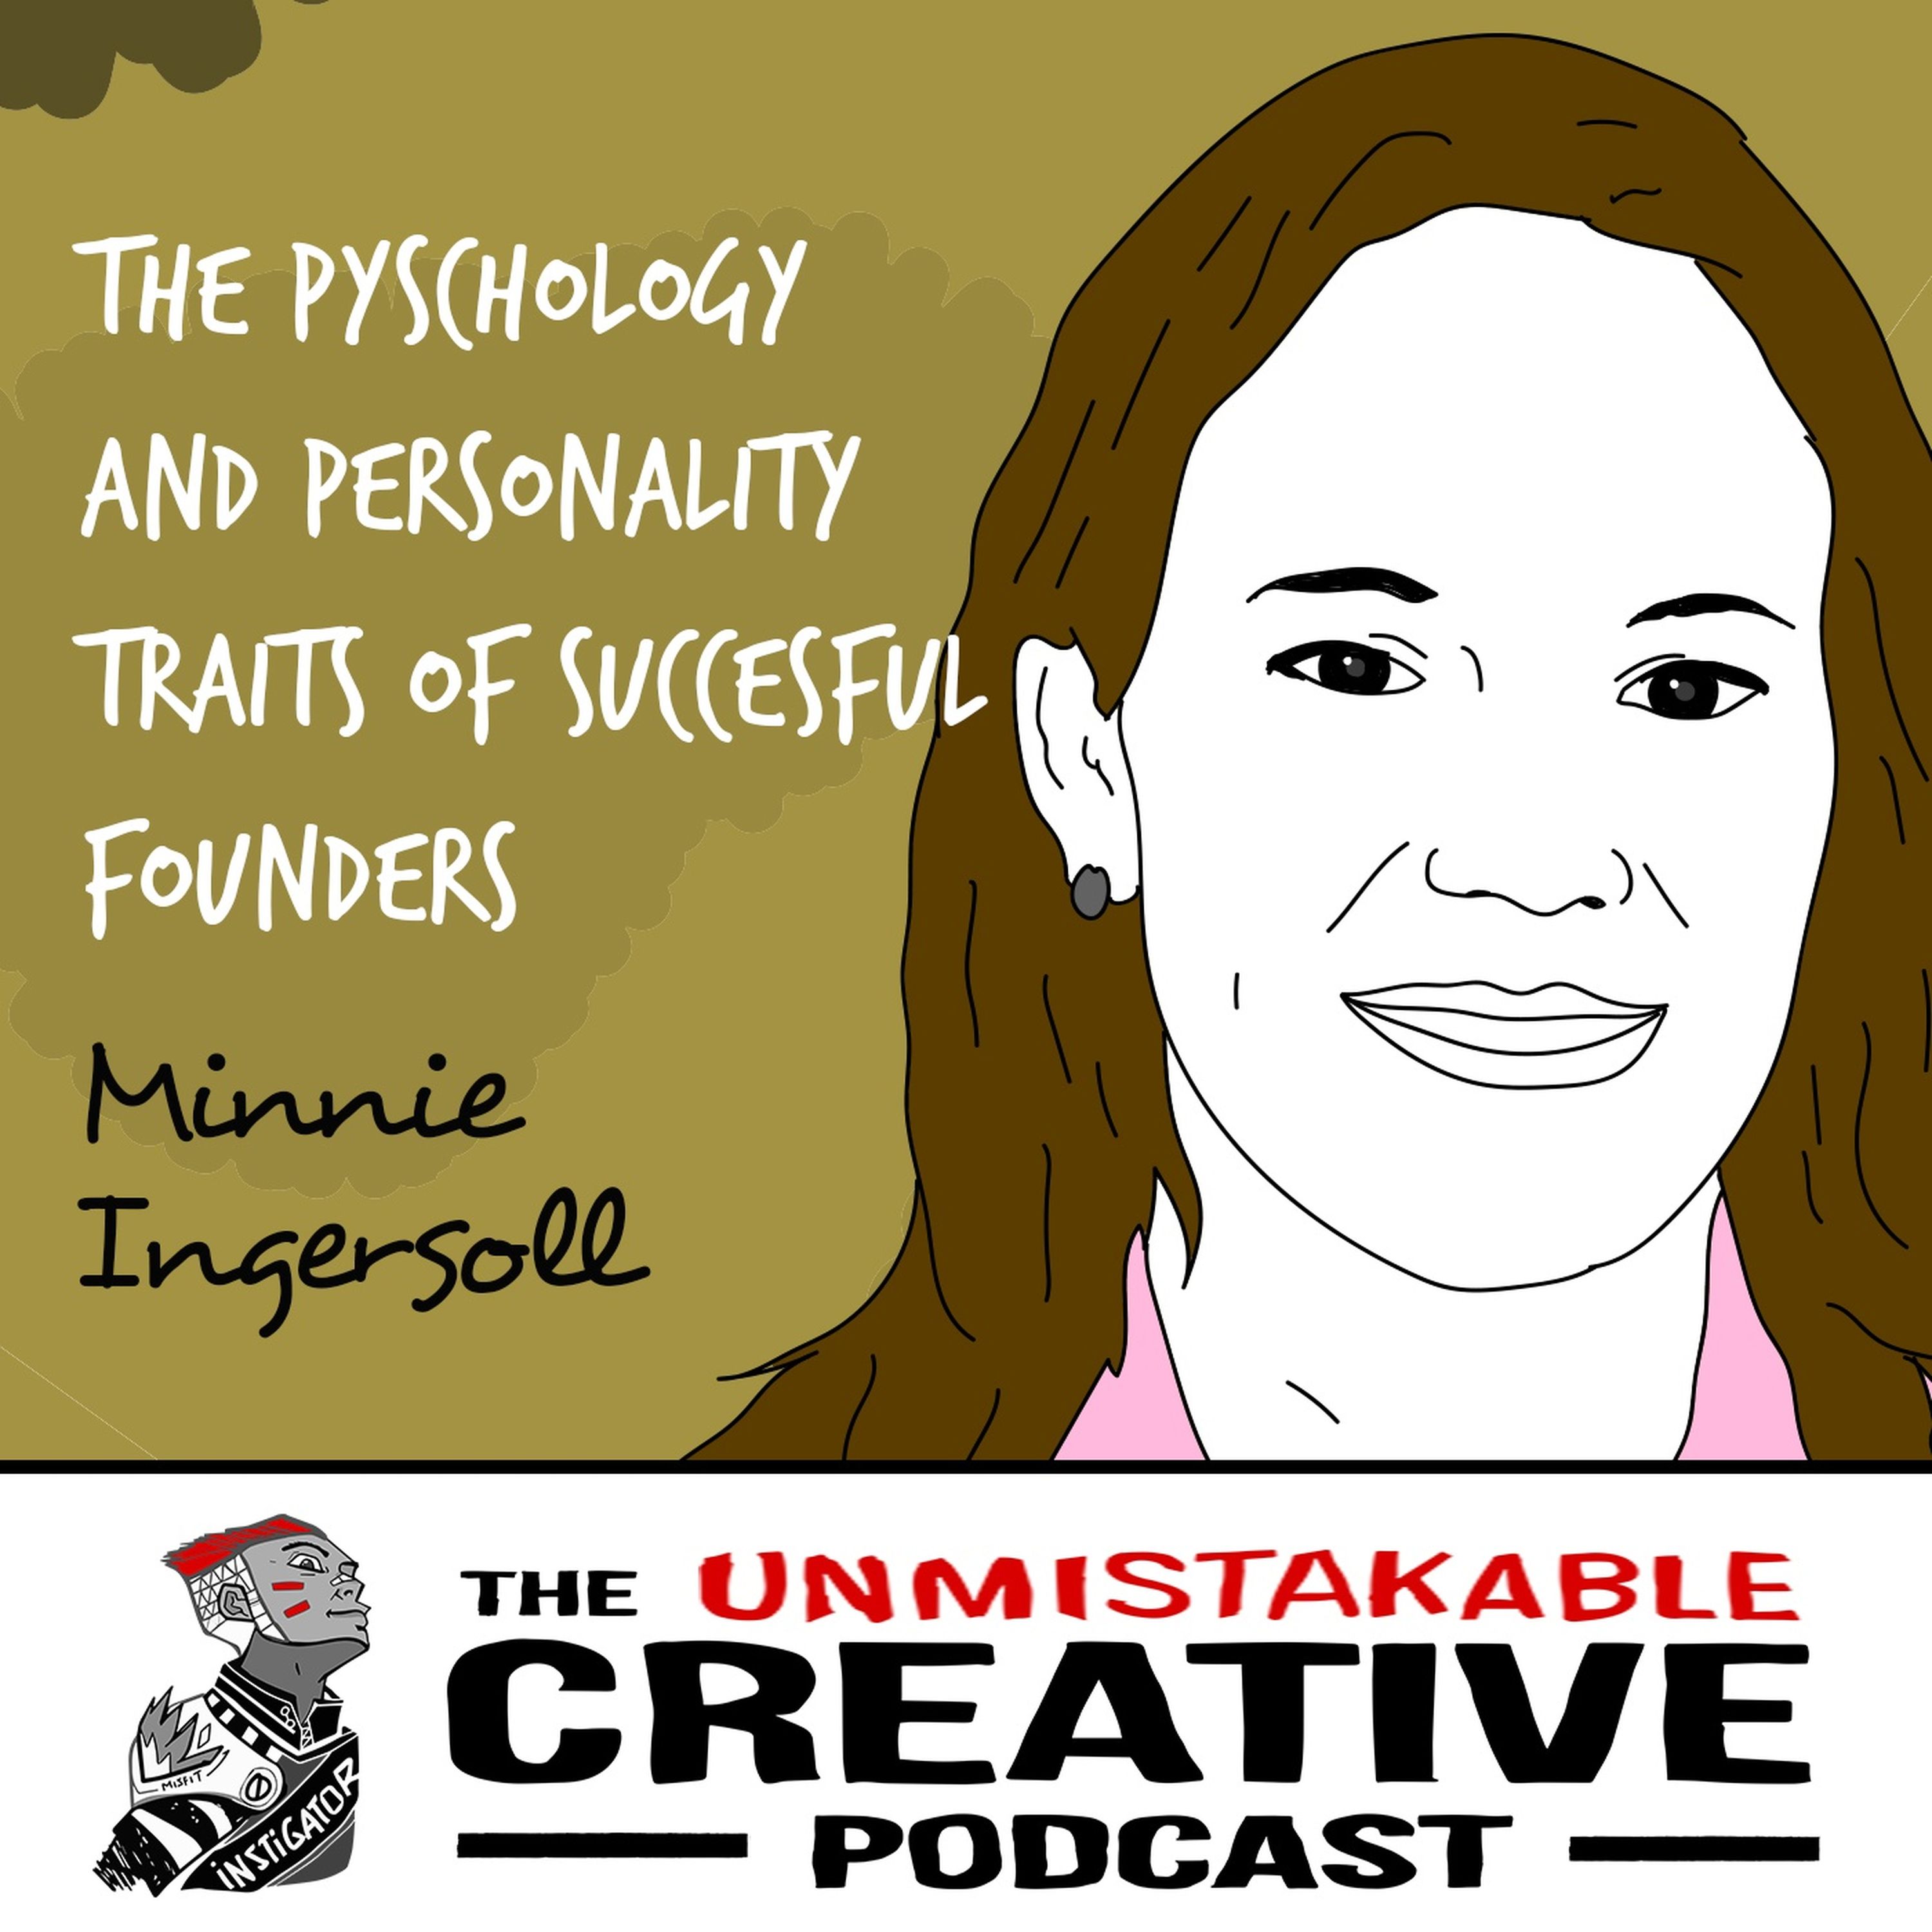 Minnie Ingersoll | The Psychology and Personality Traits of Successful Founders